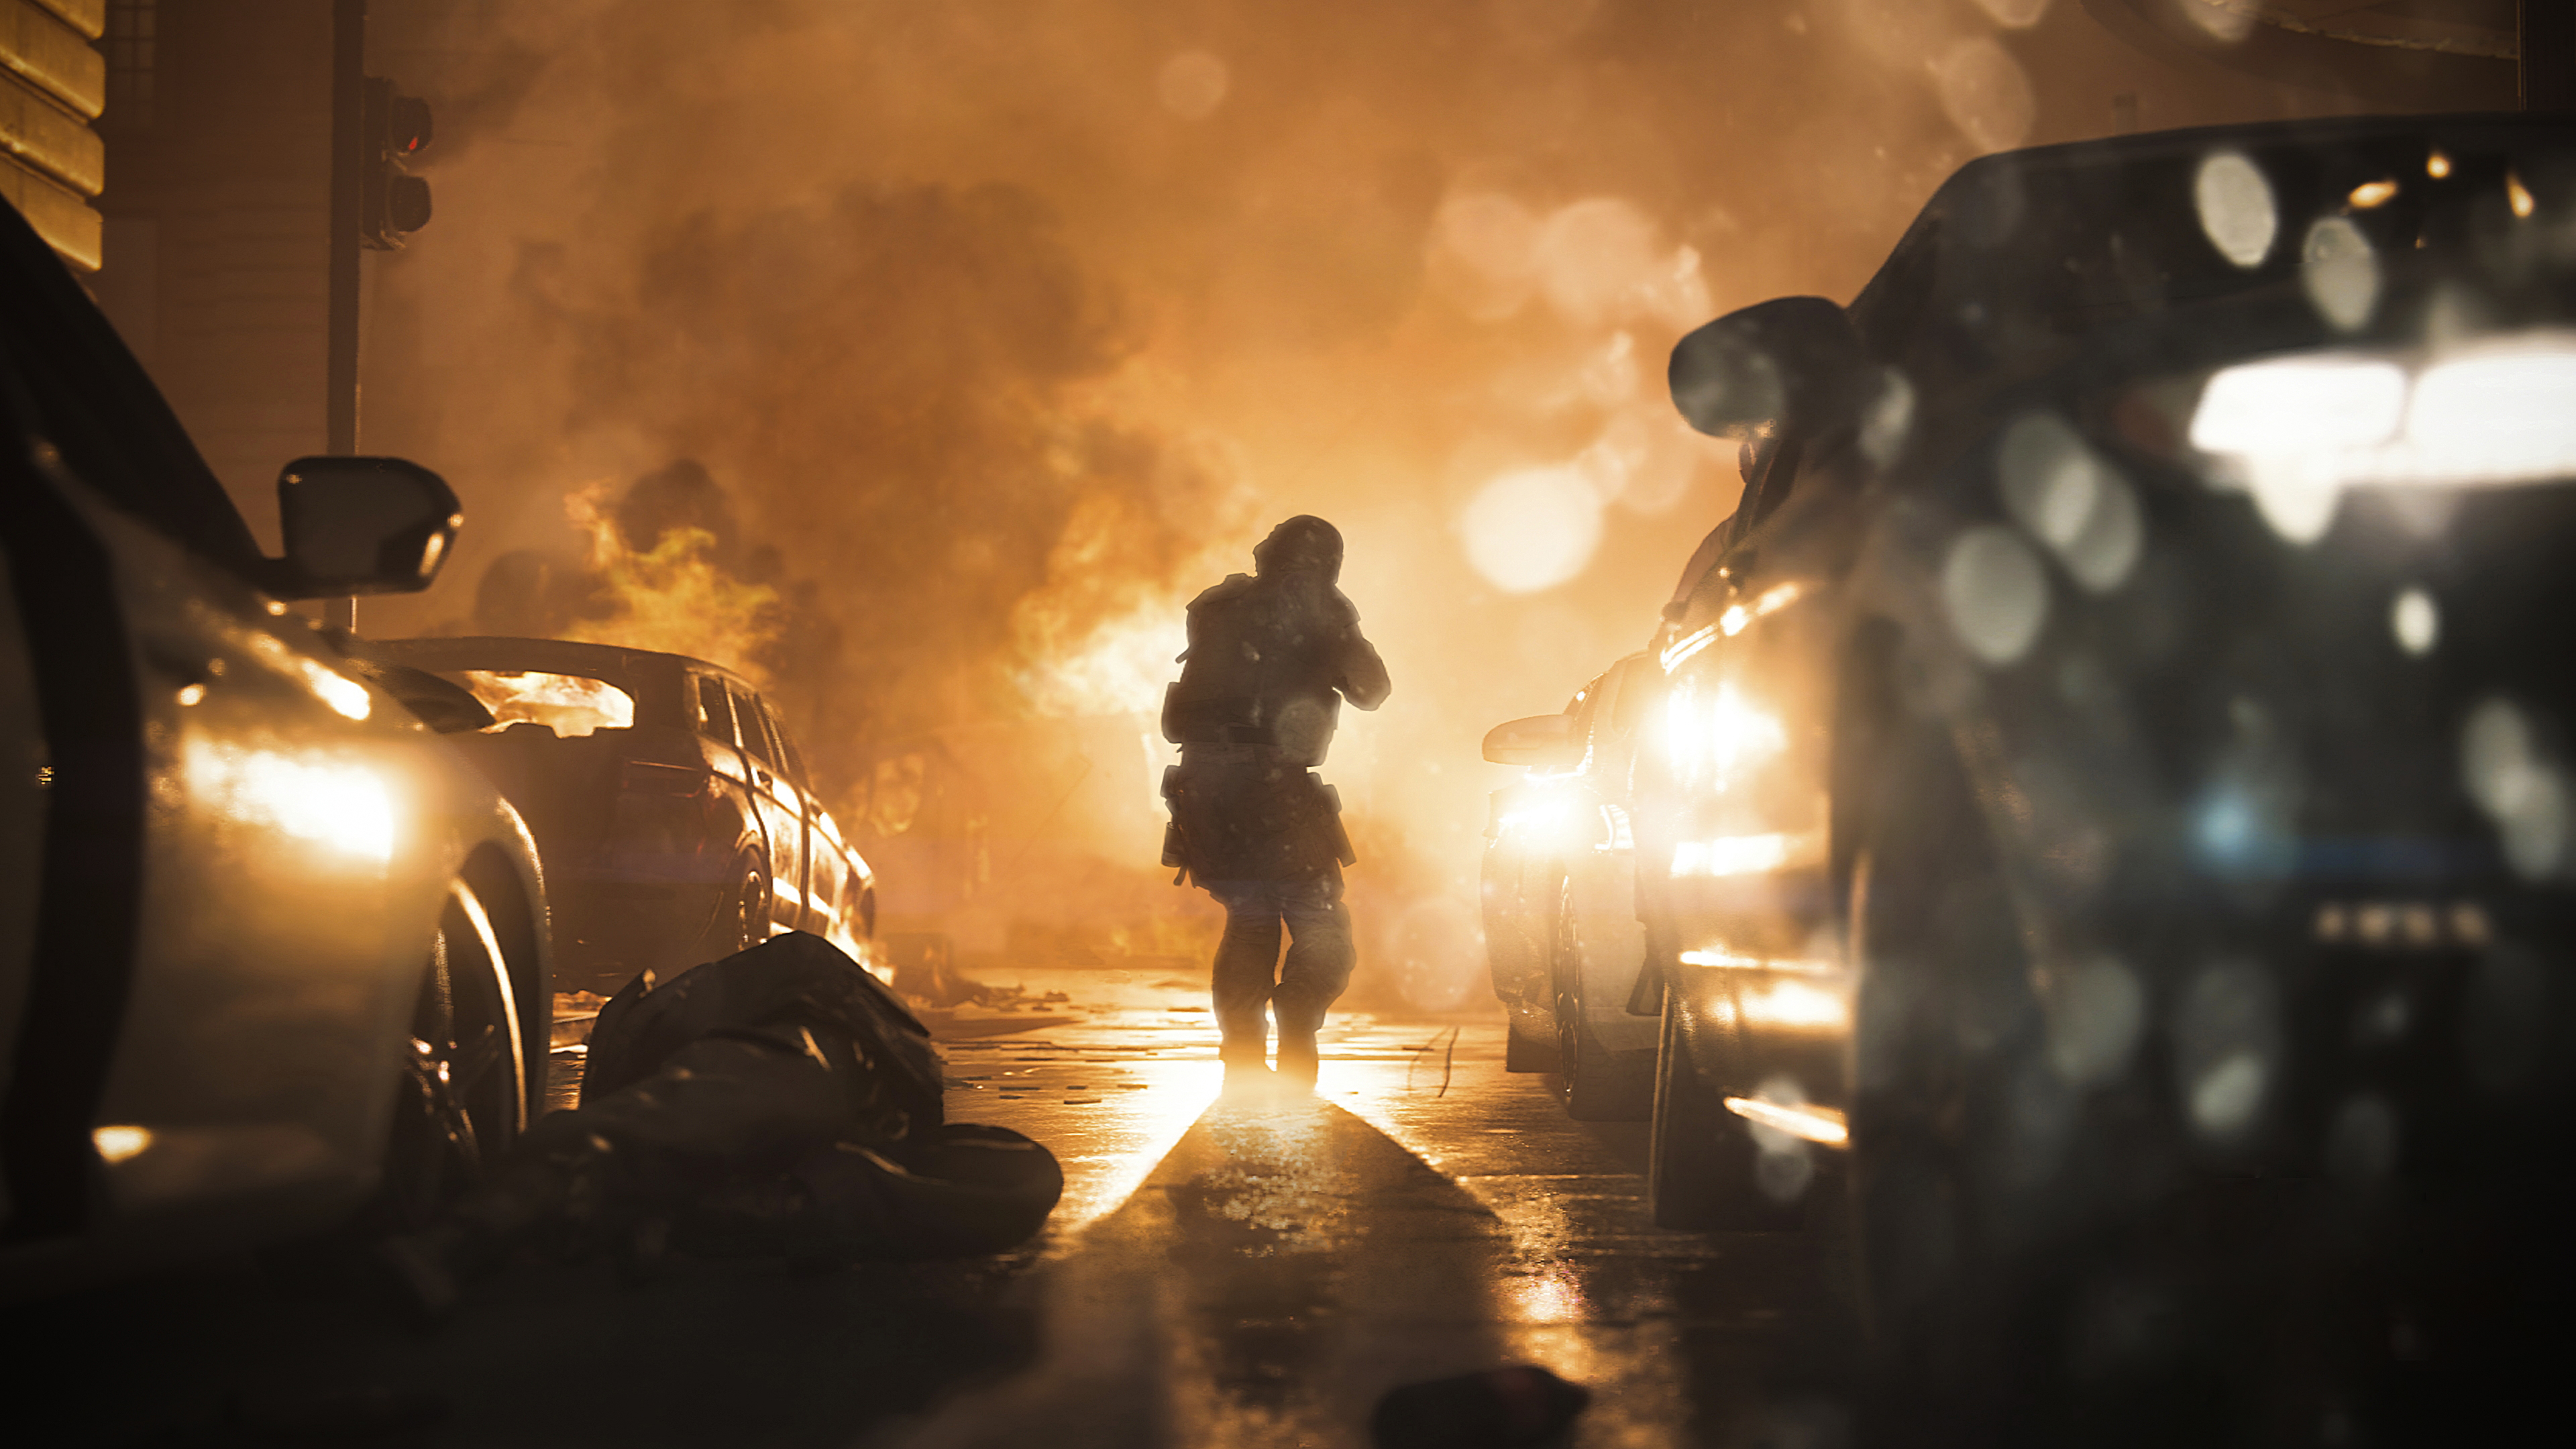 Call Of Duty Modern Warfare 2019 Wallpaper Hd Games 4k Wallpapers Images Photos And Background